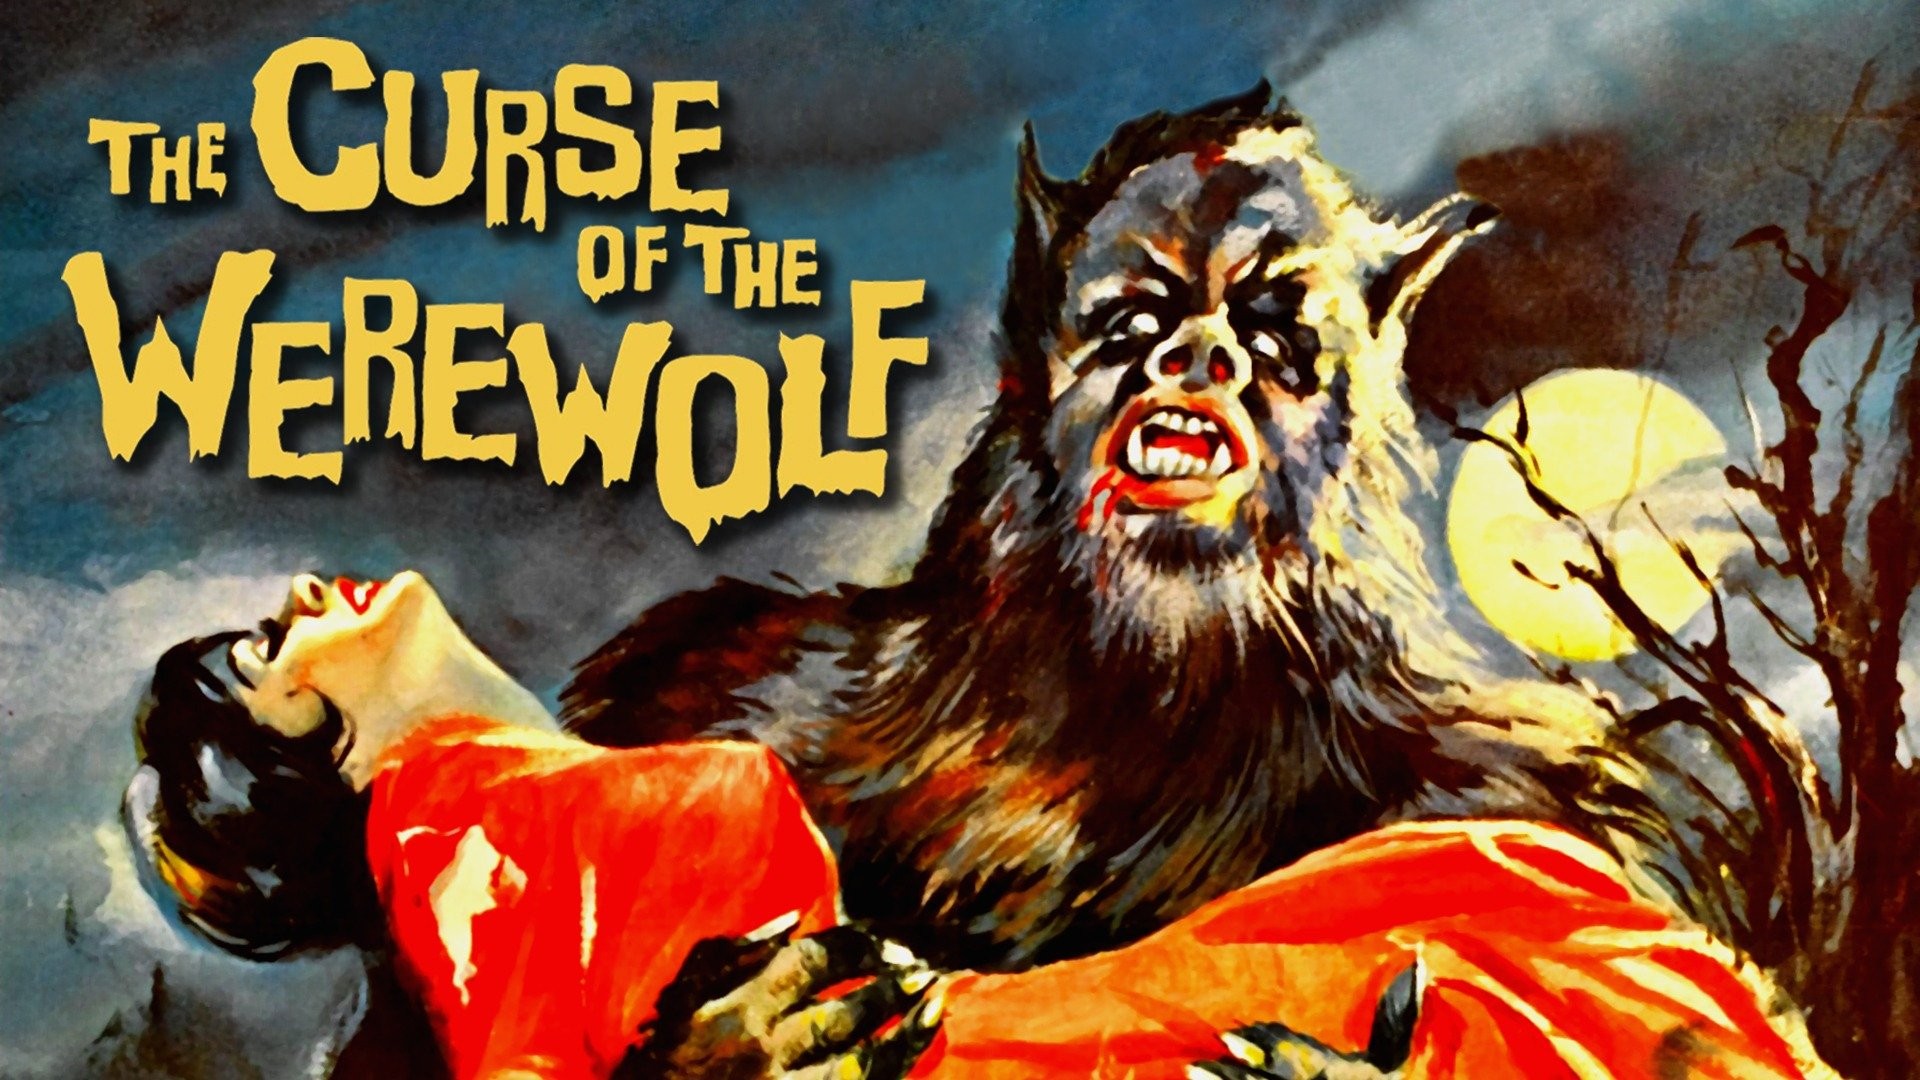 The Curse of the Werewolf - www.